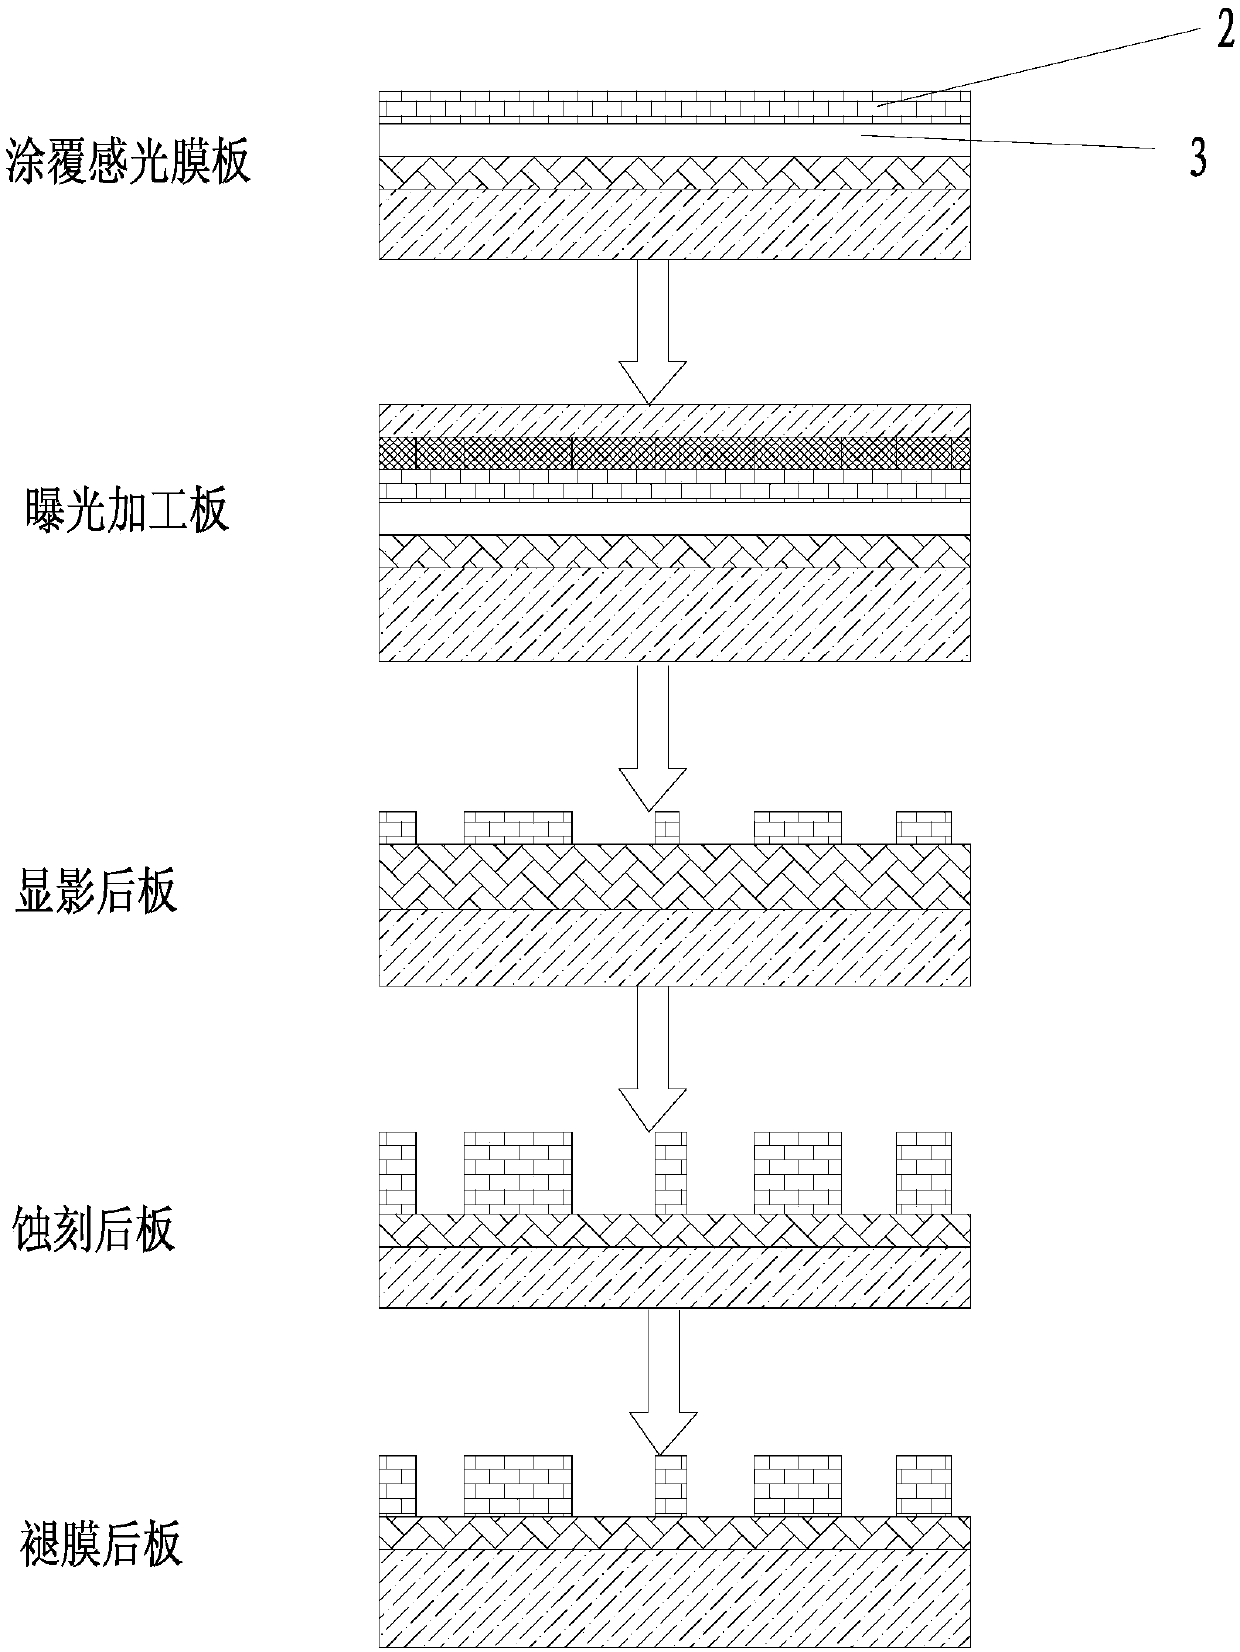 Aluminum substrate processing technology